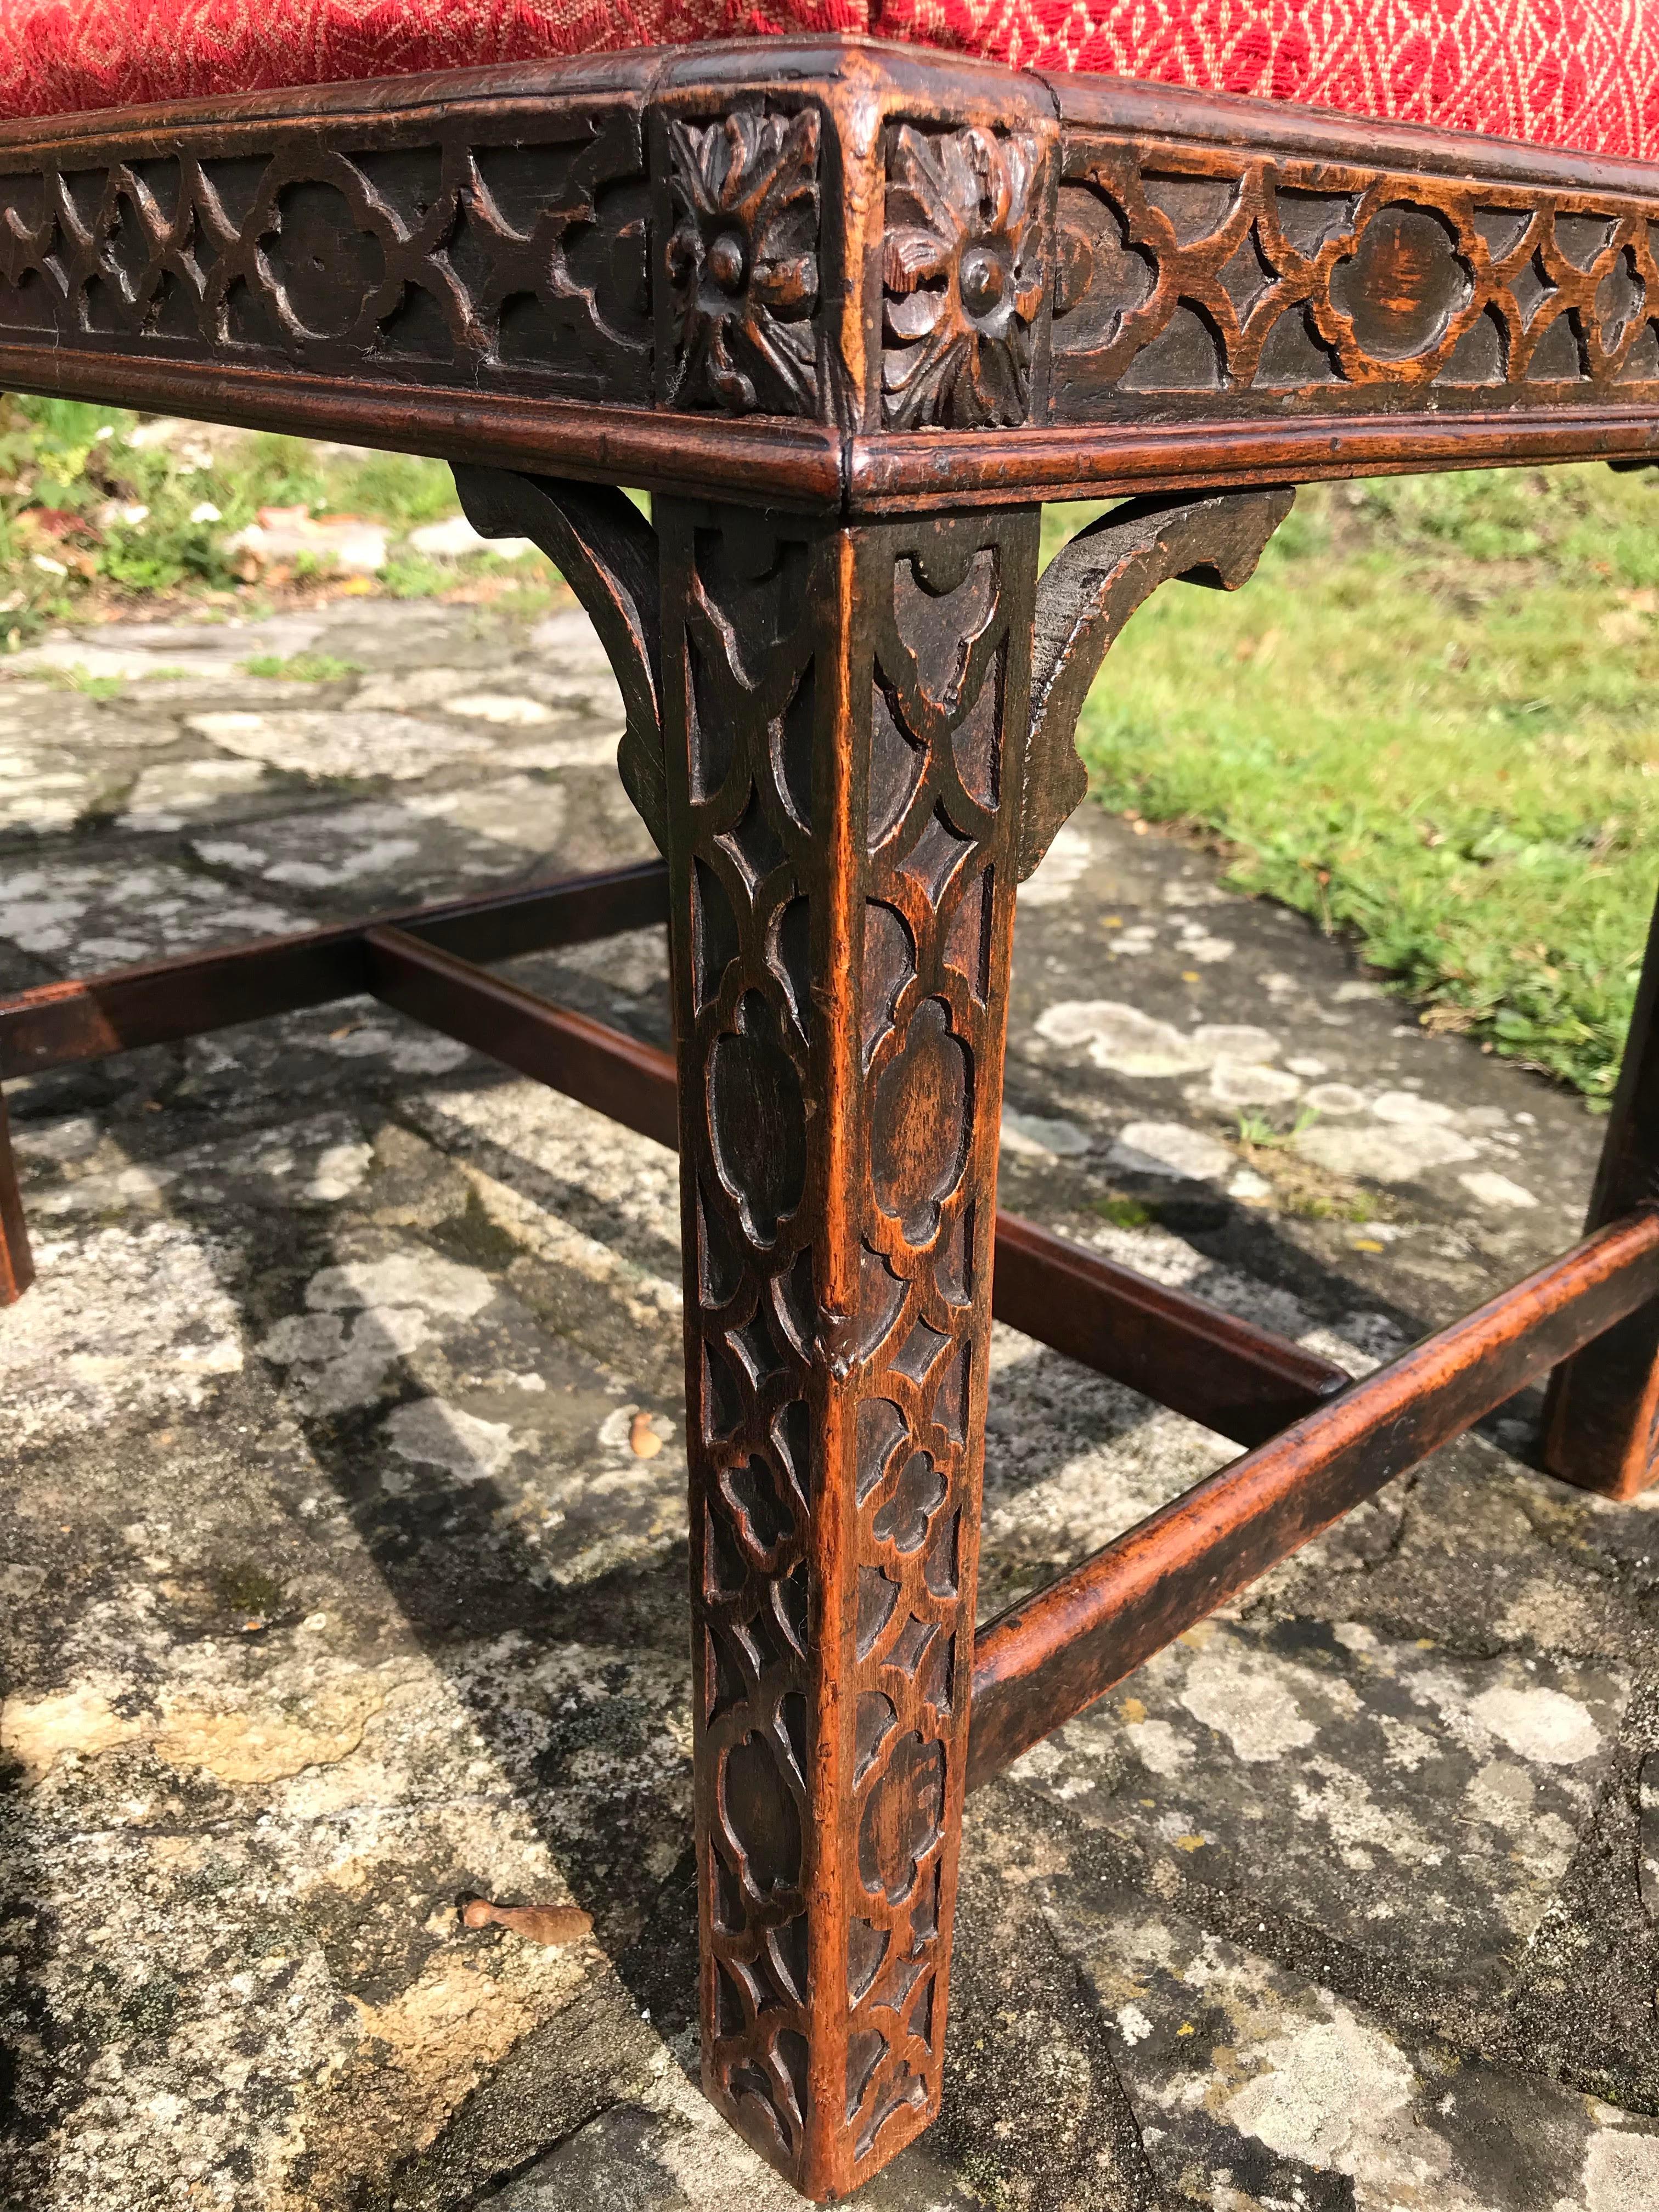 A sophisticated antique blind-fret carved mahogany stool in the Chinese Chippendale style.
19th century.

In excellent condition and sturdy in the joints.

Measures: 
L: 55 cm
W: 44 cm
H: 44 cm.

Nb. Blind-fret carving is encountered in many of